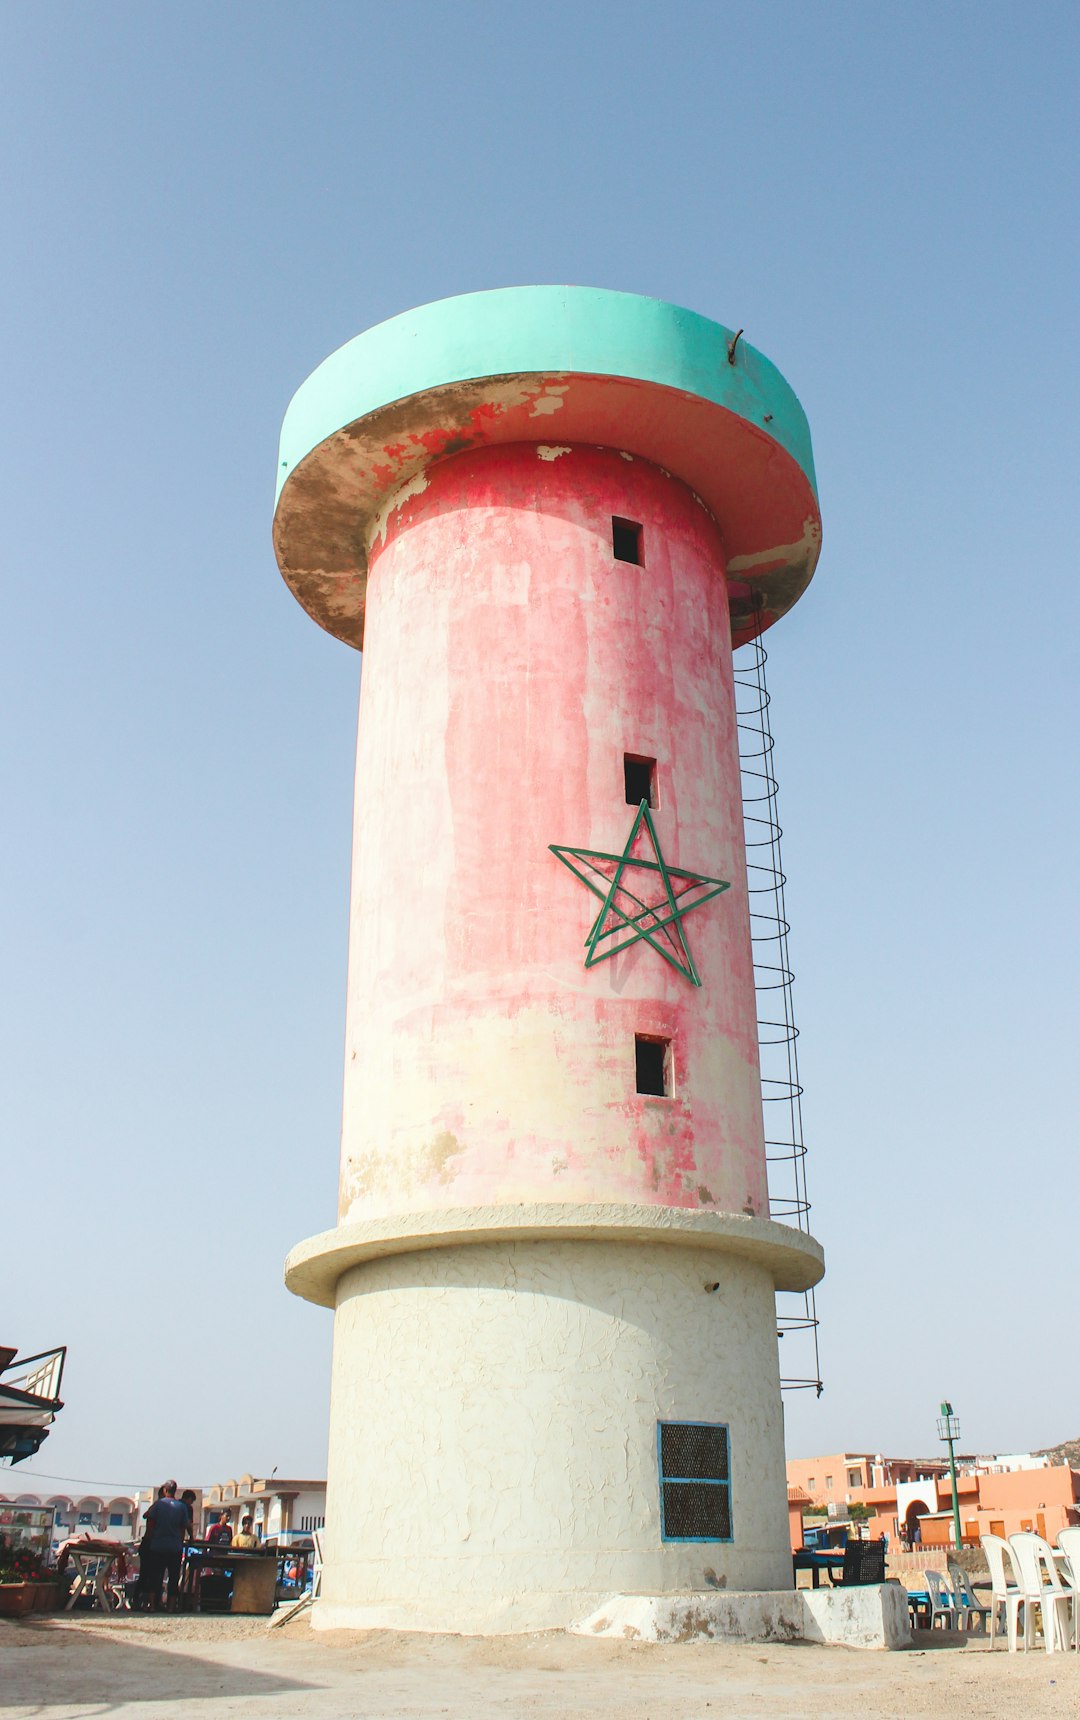 travelers stories about Lighthouse in Imsouane, Morocco